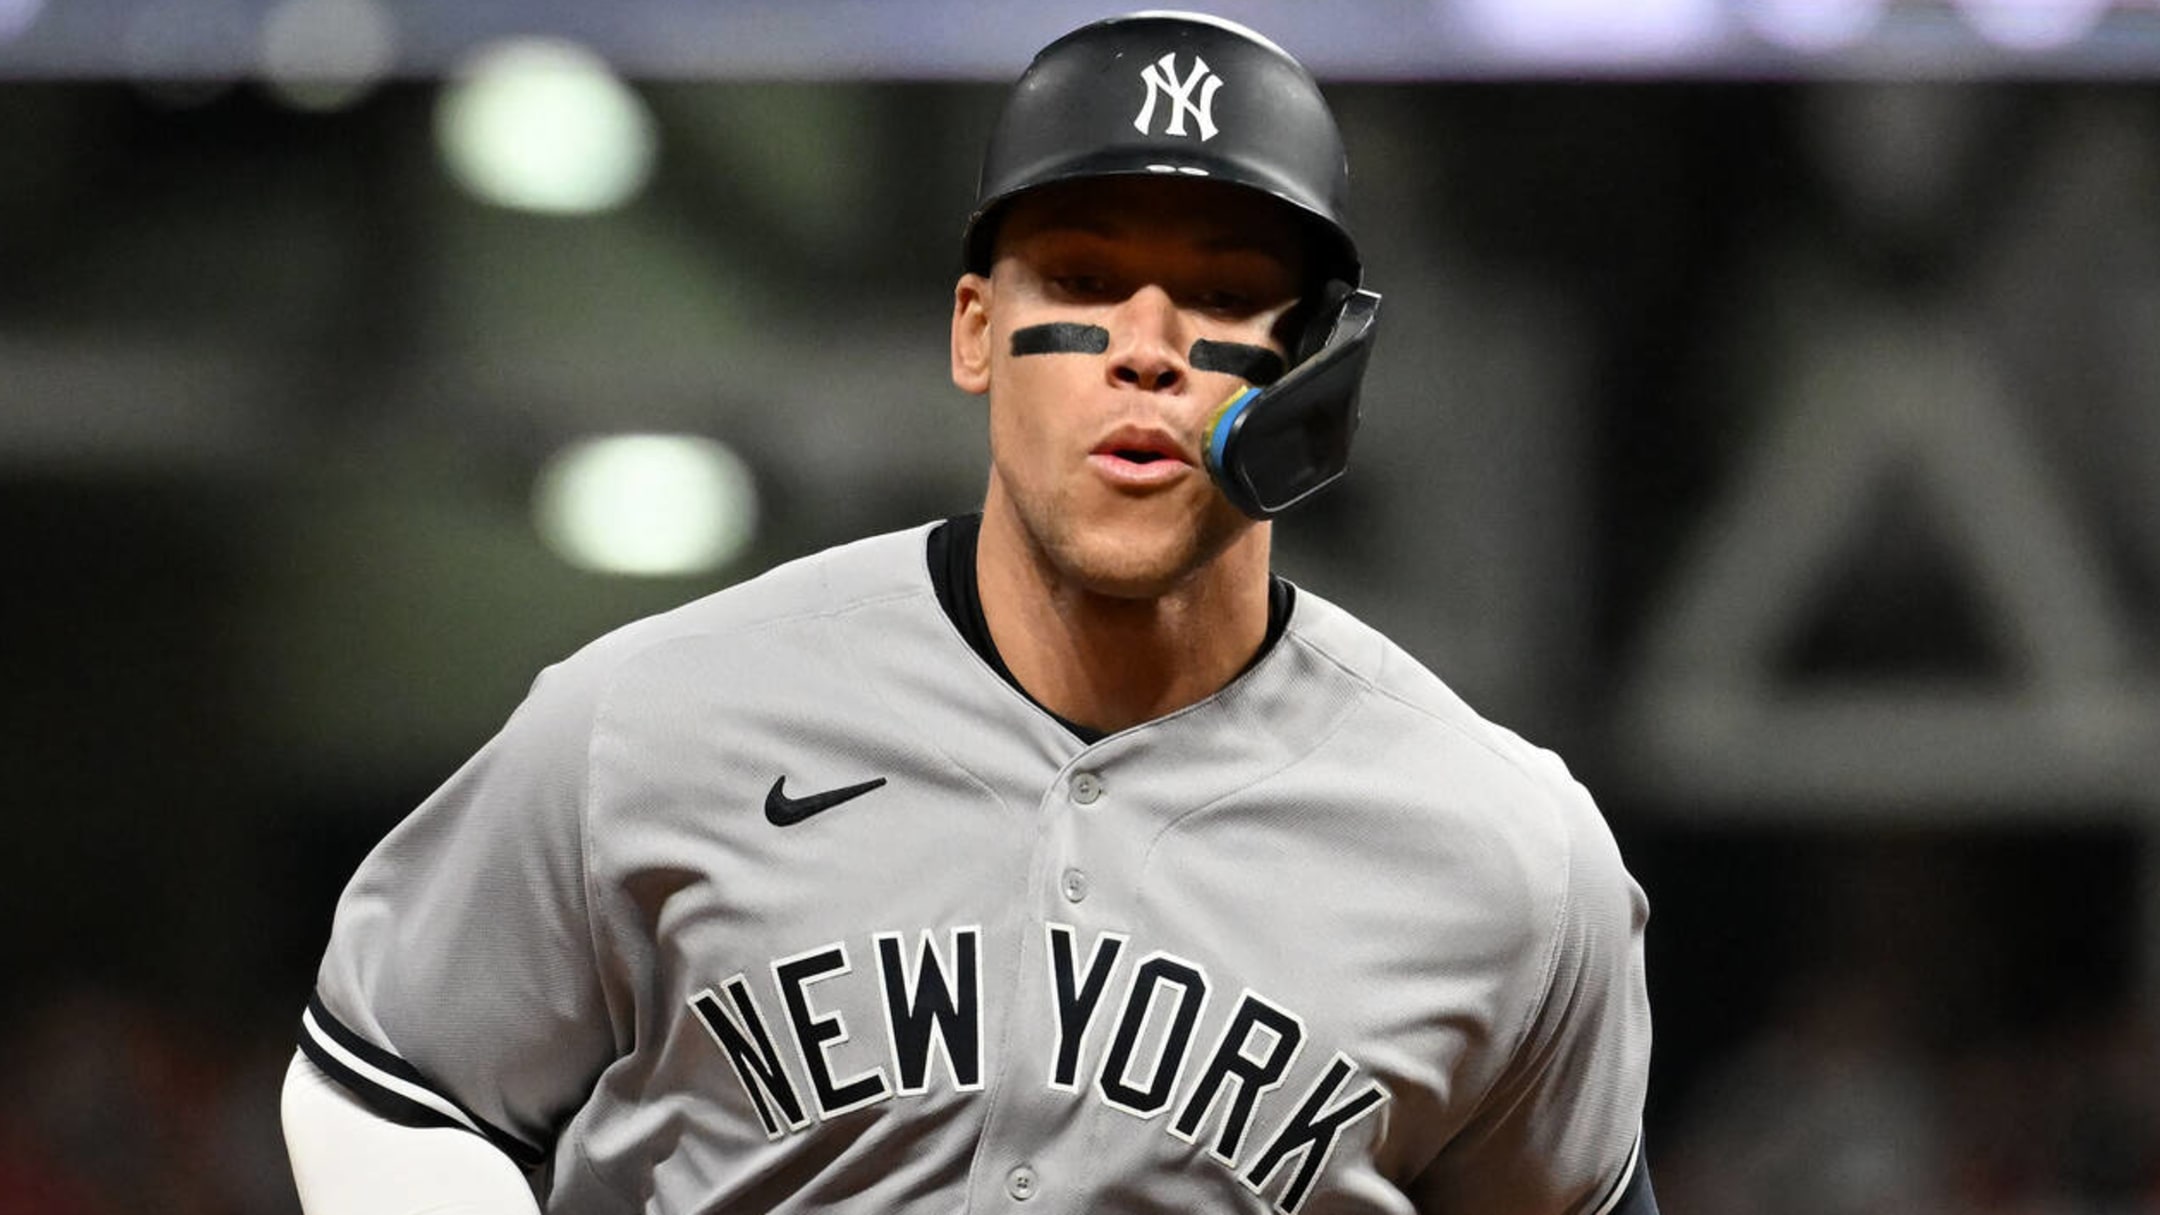 The Yankees' Aaron Judge and Mets' Pete Alonso are having